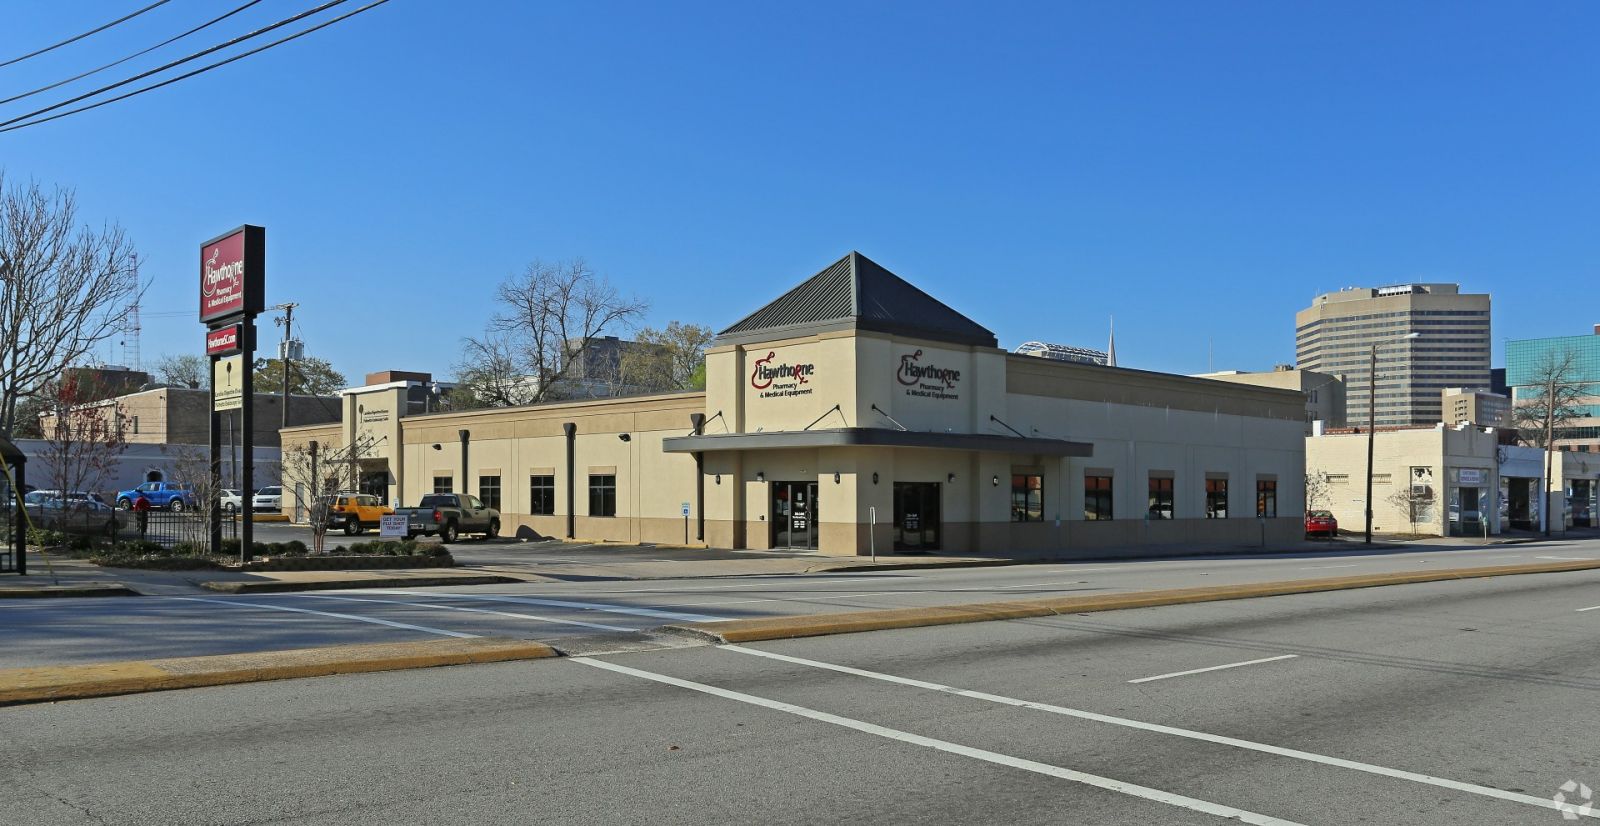 A 14,100-square-foot medical office building on Taylor Street in downtown Columbia has sold for $3.3 million. (Photo/Provided)